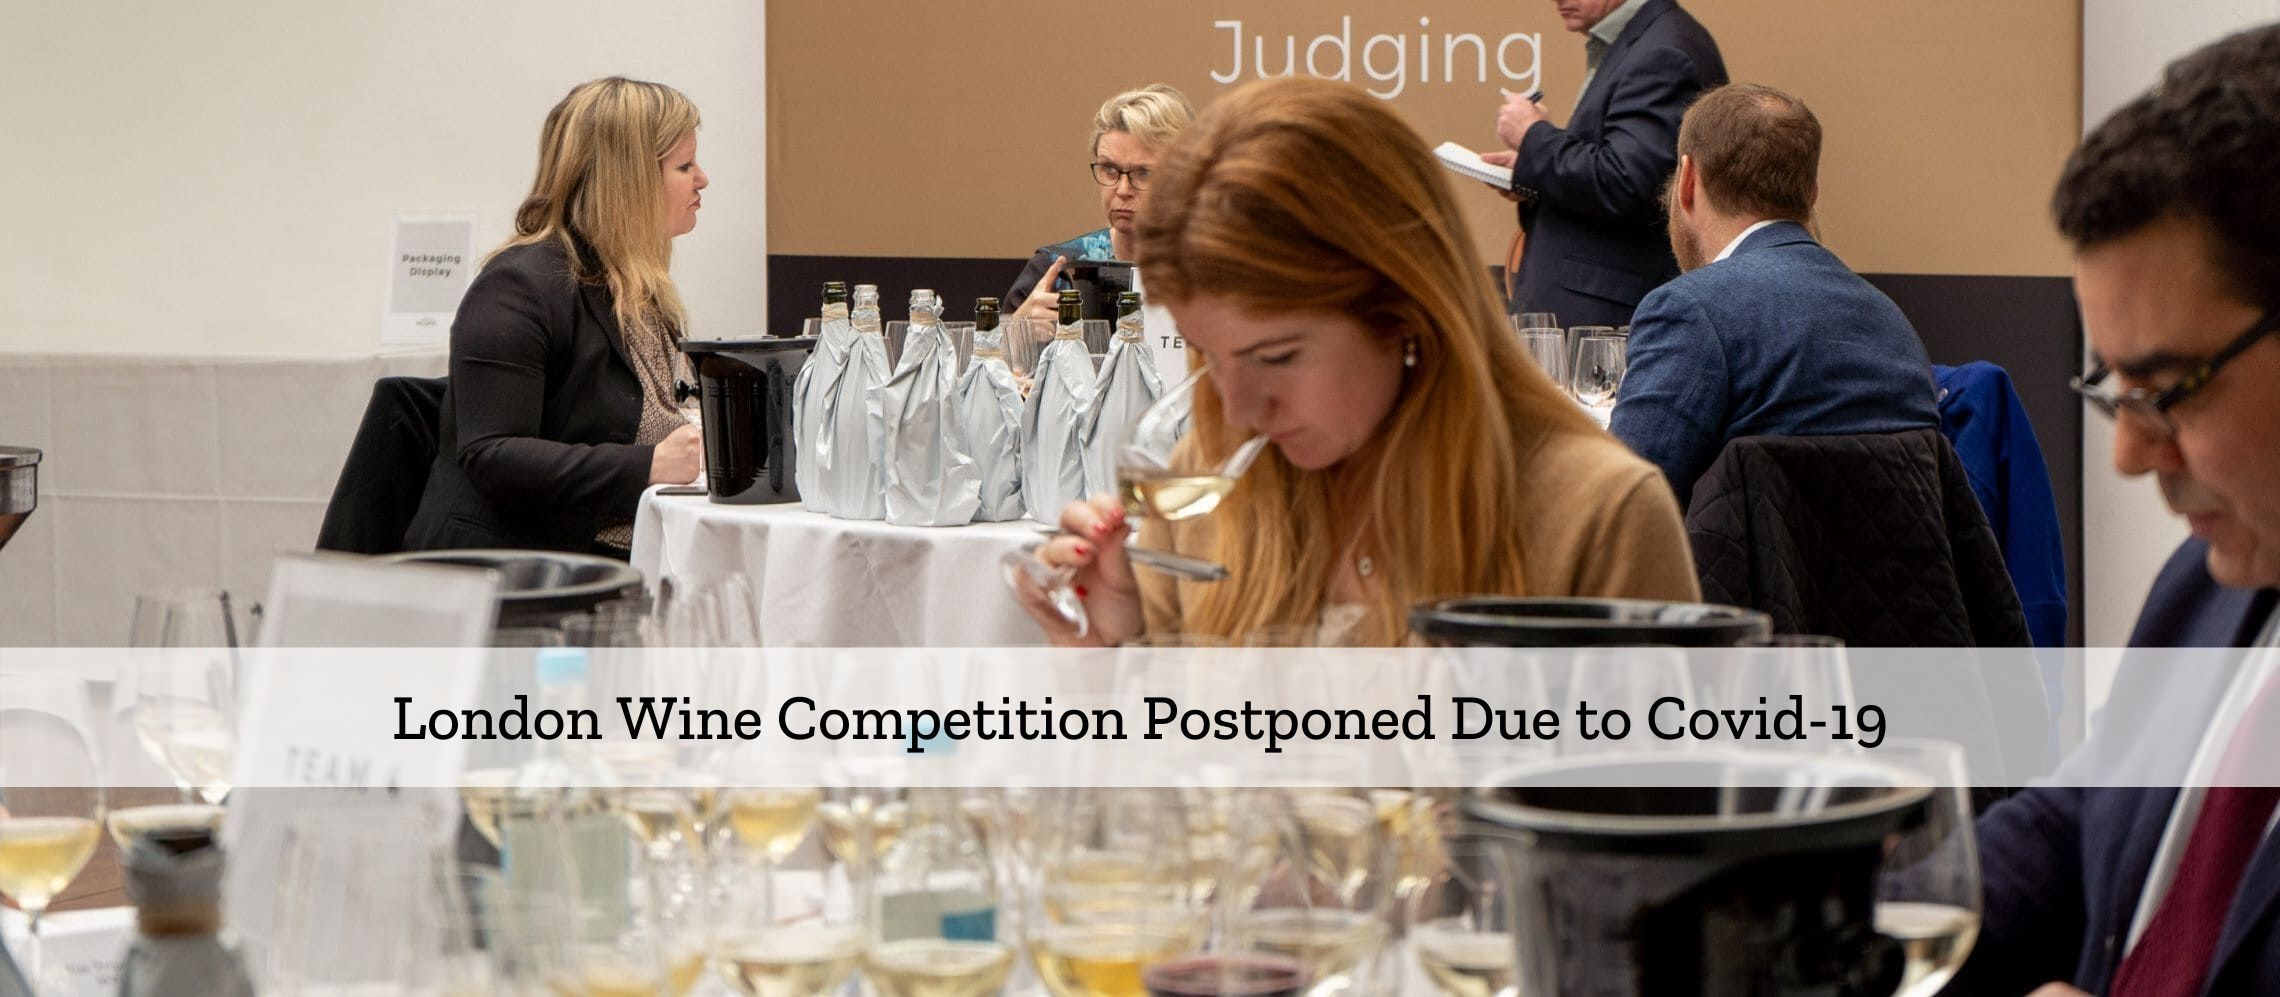 Photo for: London Wine Competition Postponed Over Covid-19